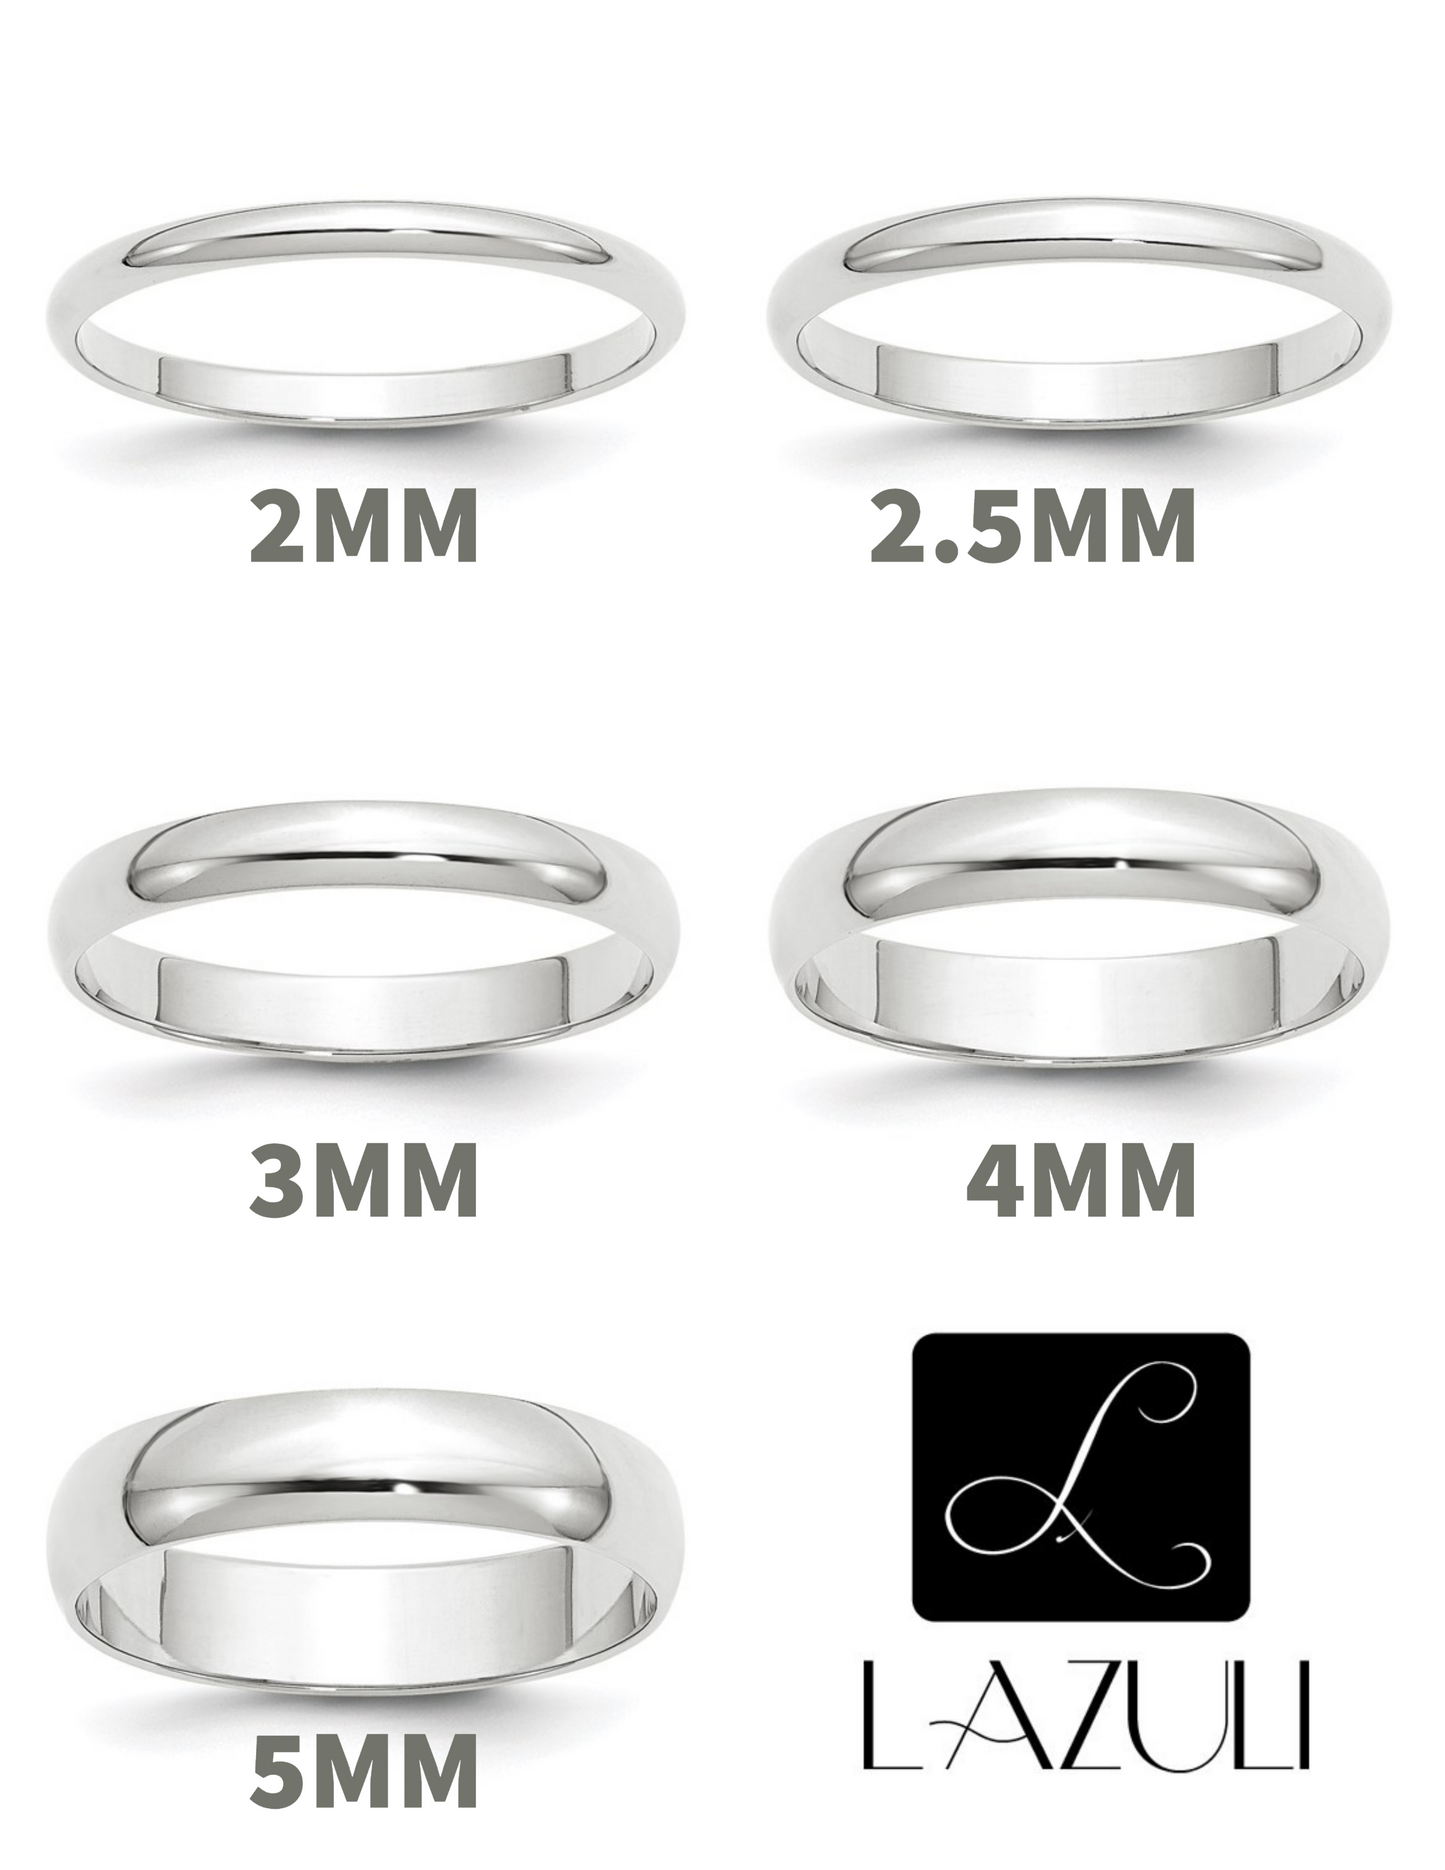 10K Solid White Gold 2mm 2.5mm 3mm 4mm 5mm Men's Women's Wedding Band Ring Sizes 4-14. Thumb Toe Midi Stacking Band